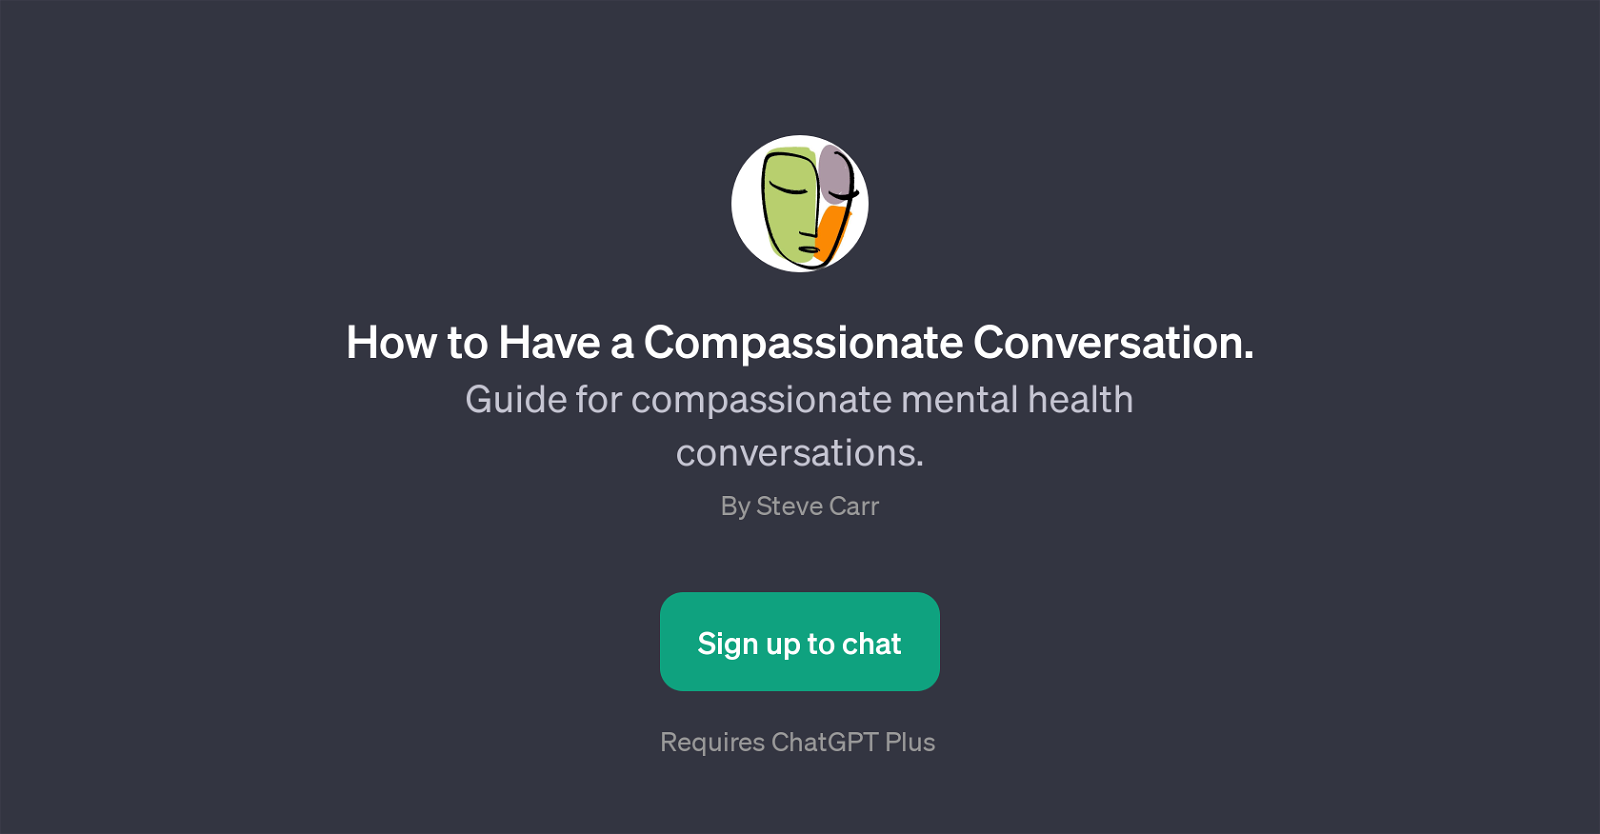 How to Have a Compassionate Conversation website